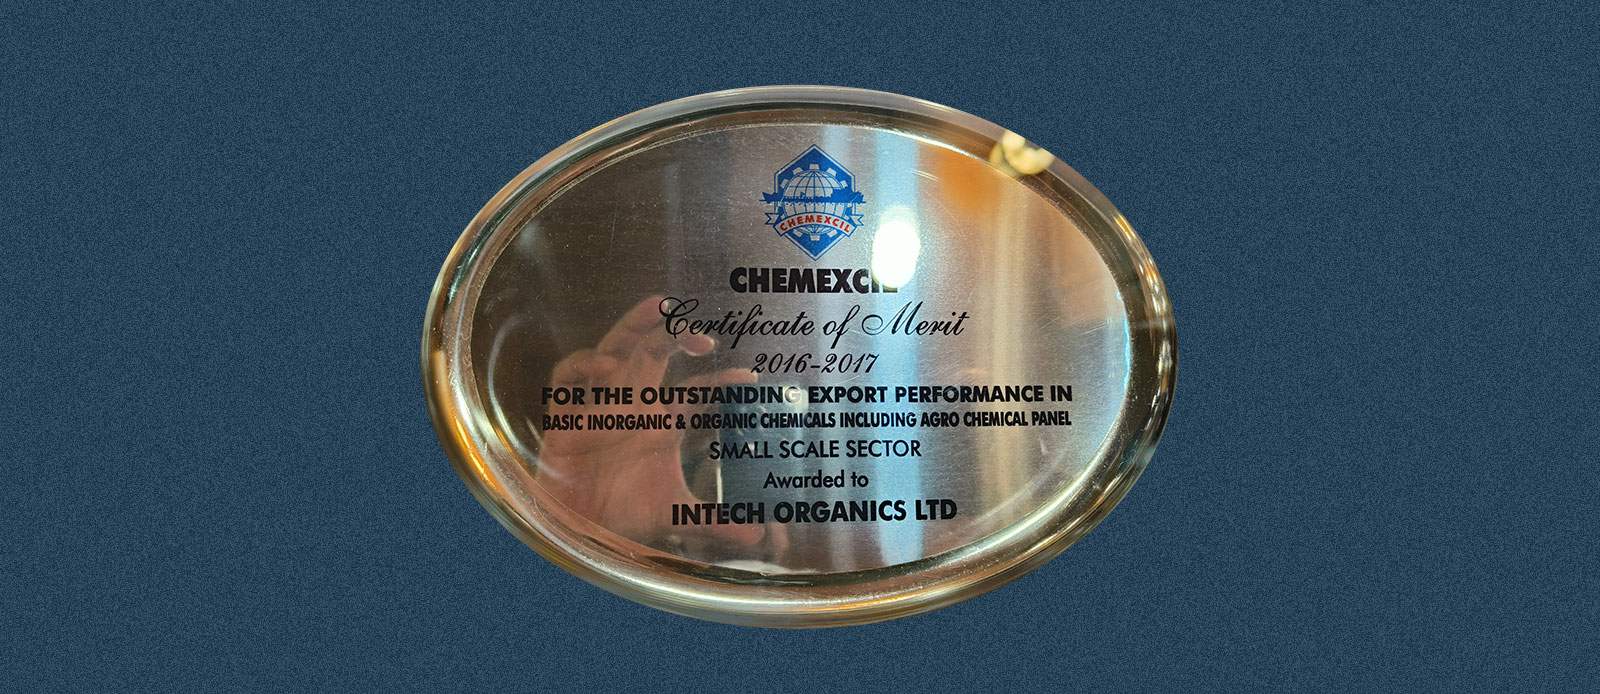 Intech Organics Earns Certificate of Merit From CHEMEXCIL Export Awards for 2016-17